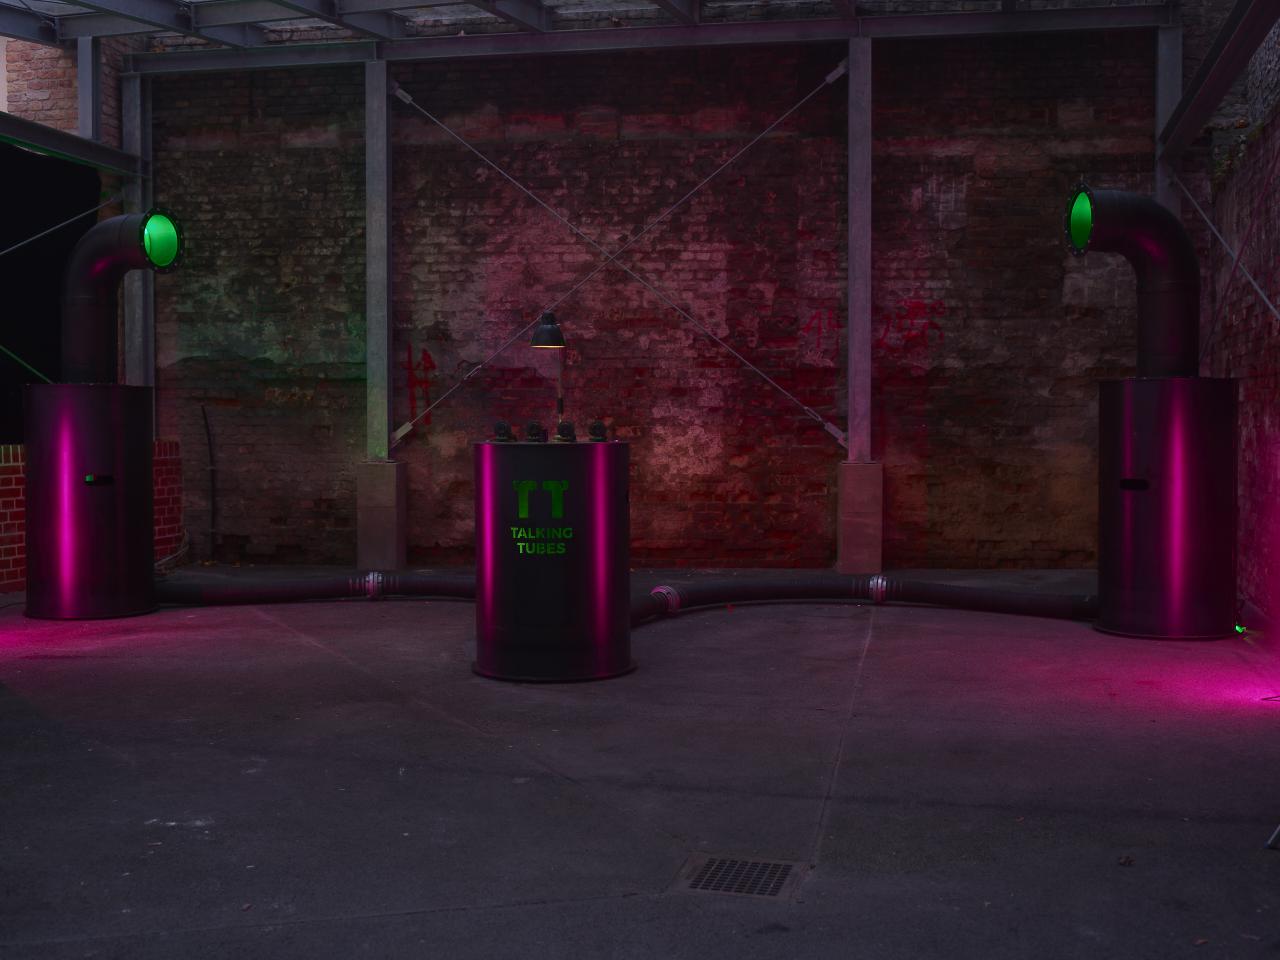 A red-lit room with the Talking Tubes installation: a control panel between two large tubes